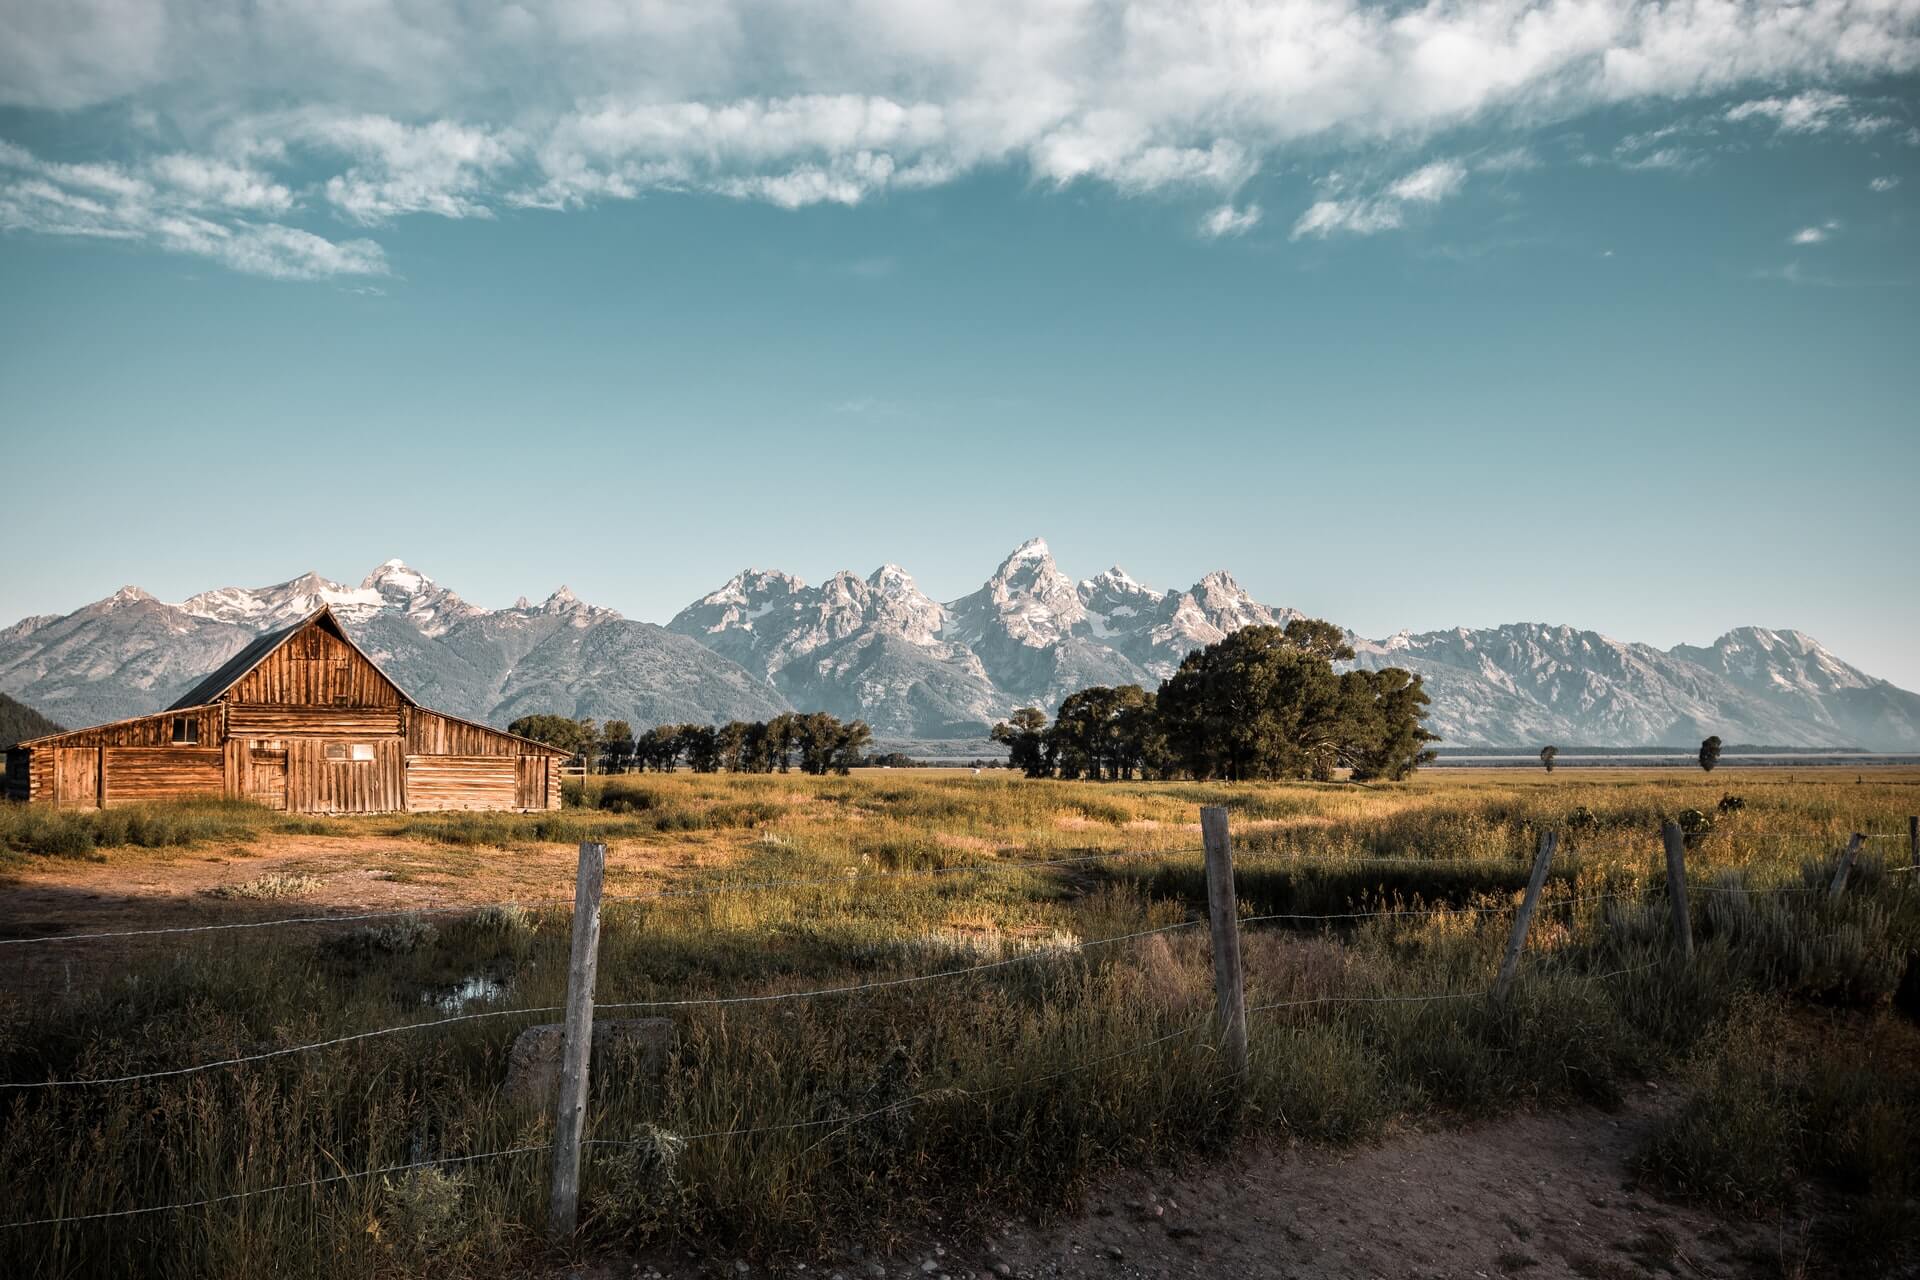 Cabin in the middle of no where in Jackson Hole with incredible mountains in the background